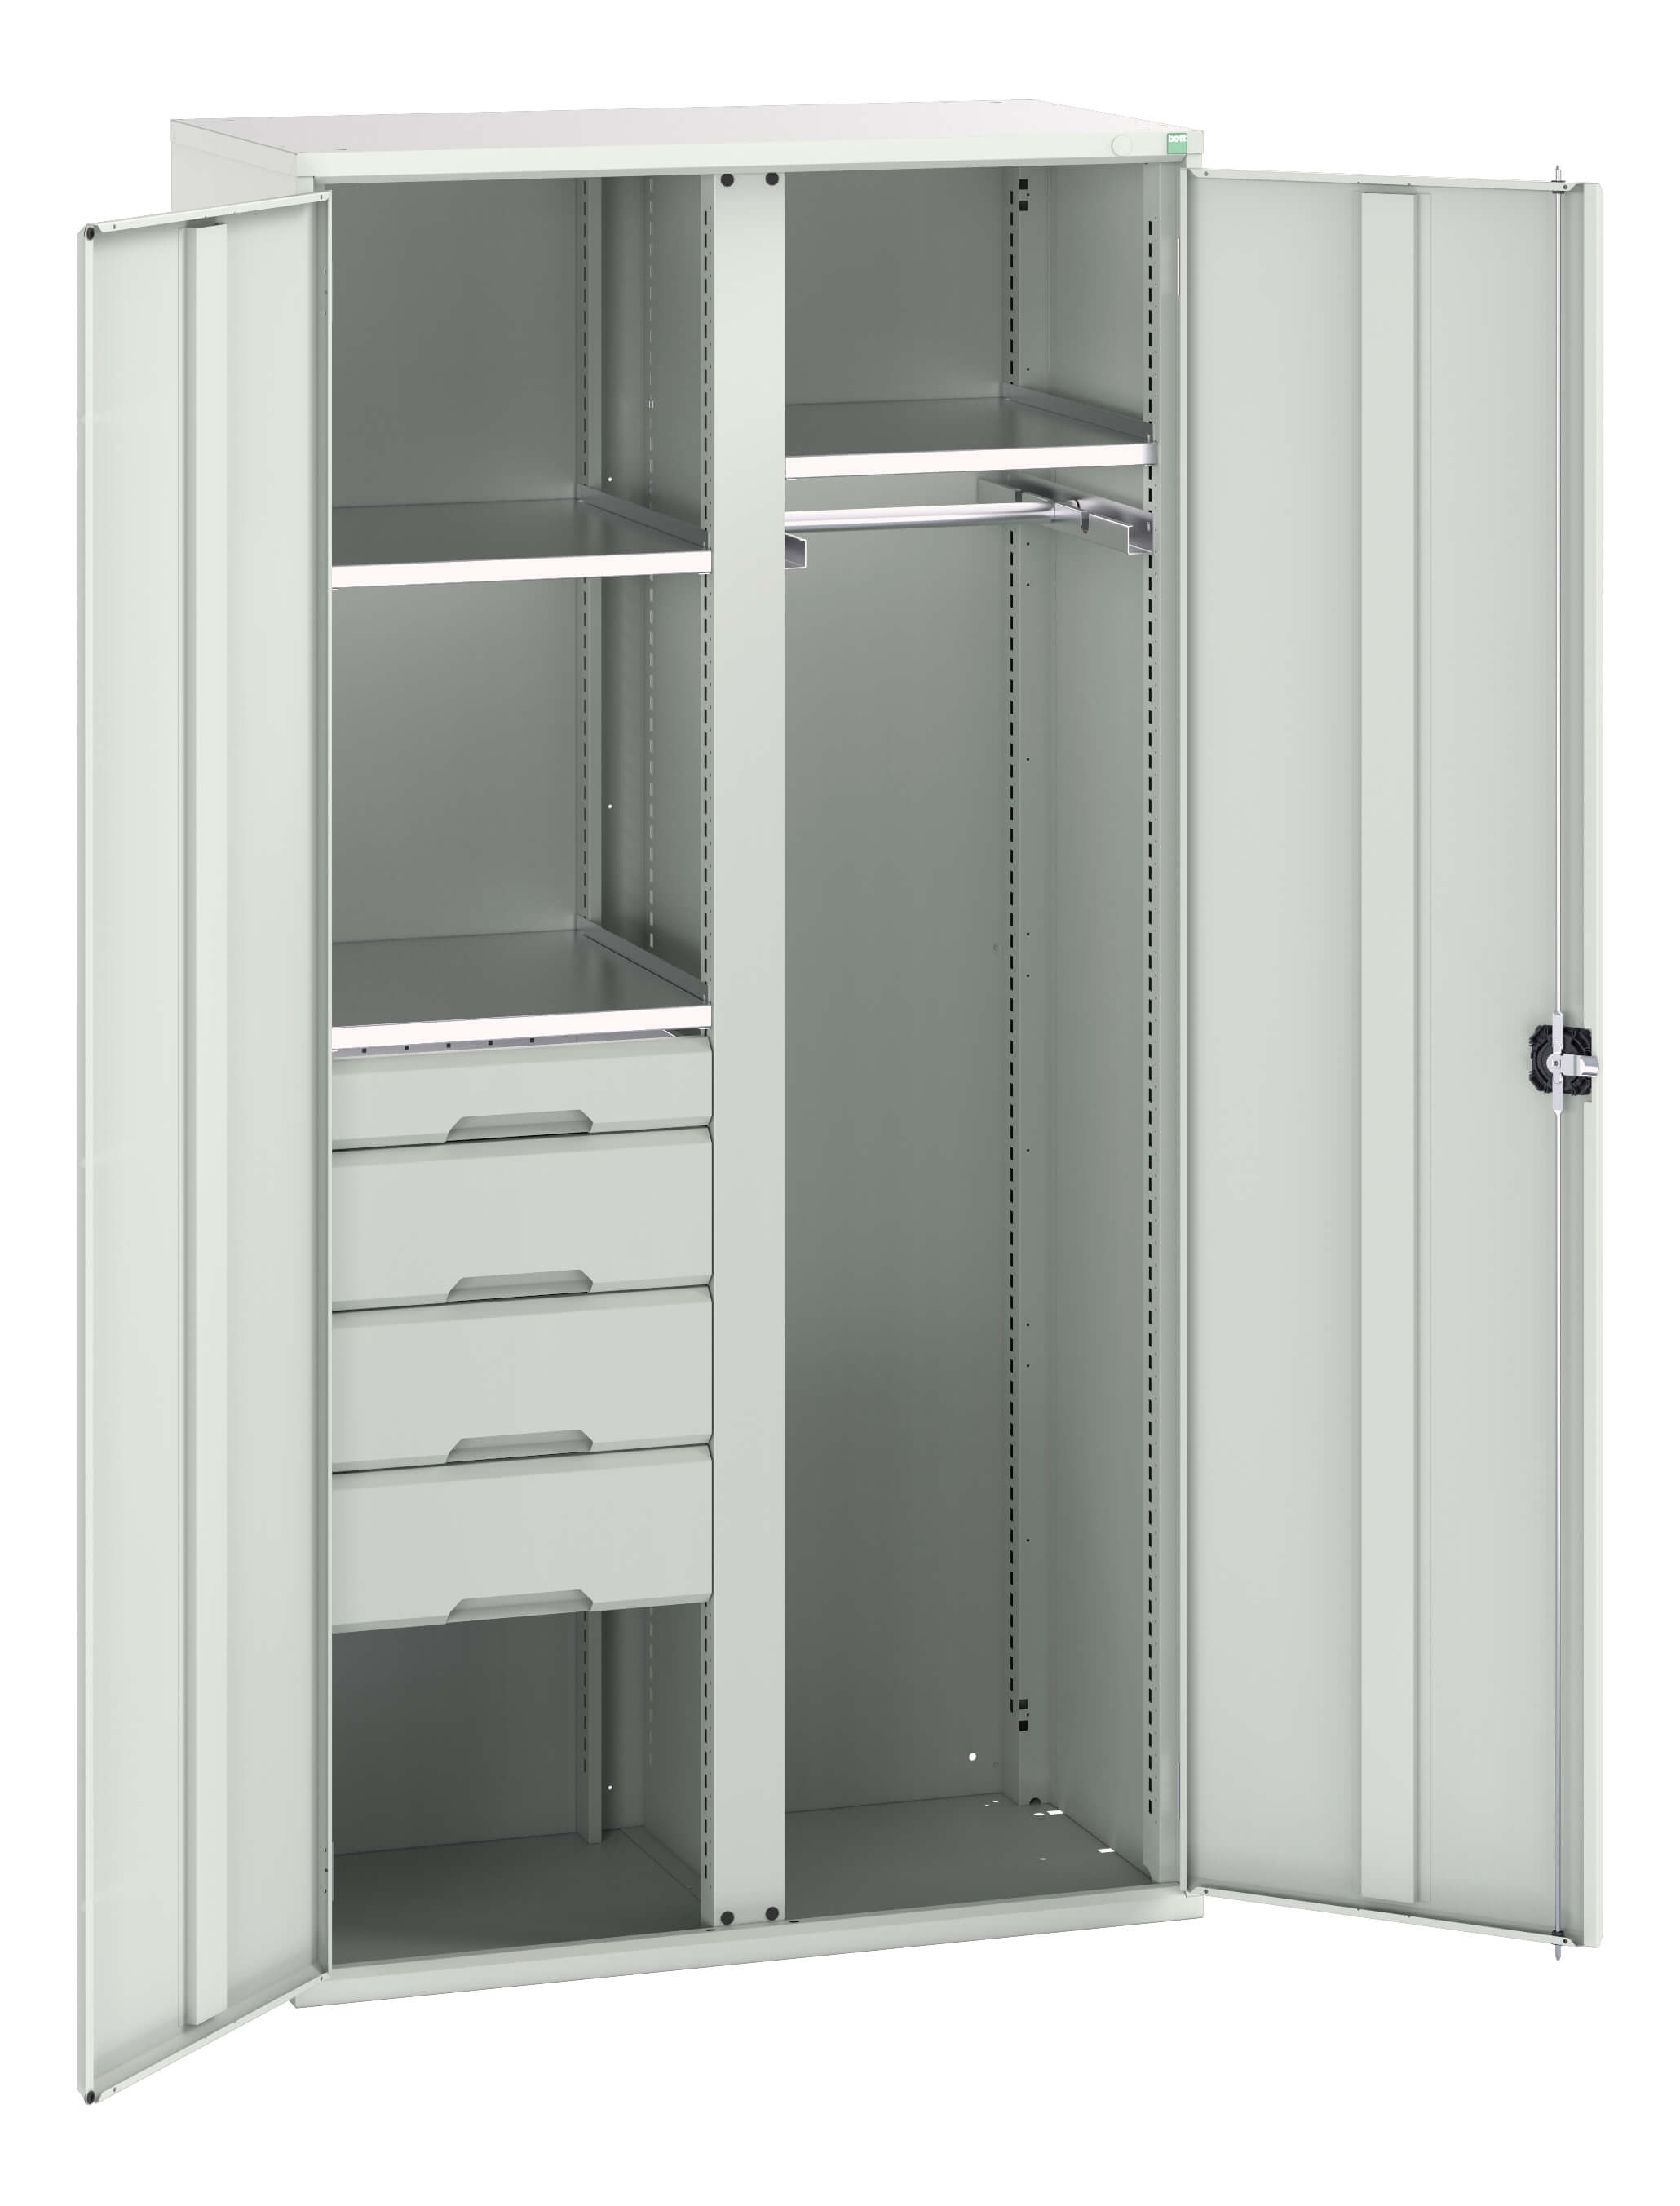 Bott Verso Ppe / Janitorial Kitted Cupboard With Vertical Partition - 16926581.16